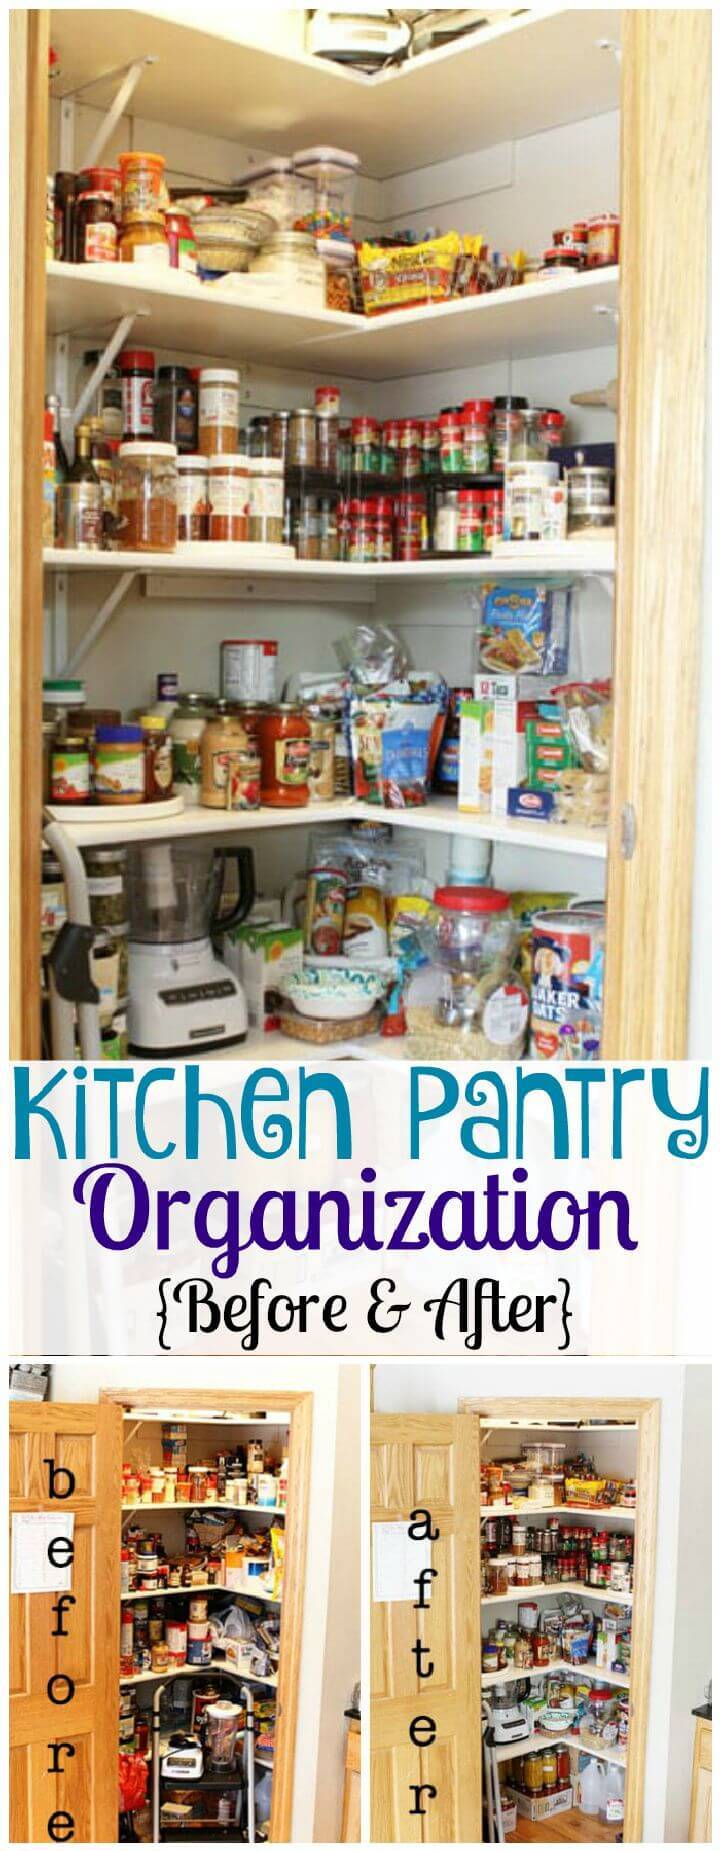 Kitchen Pantry Organization Before & After